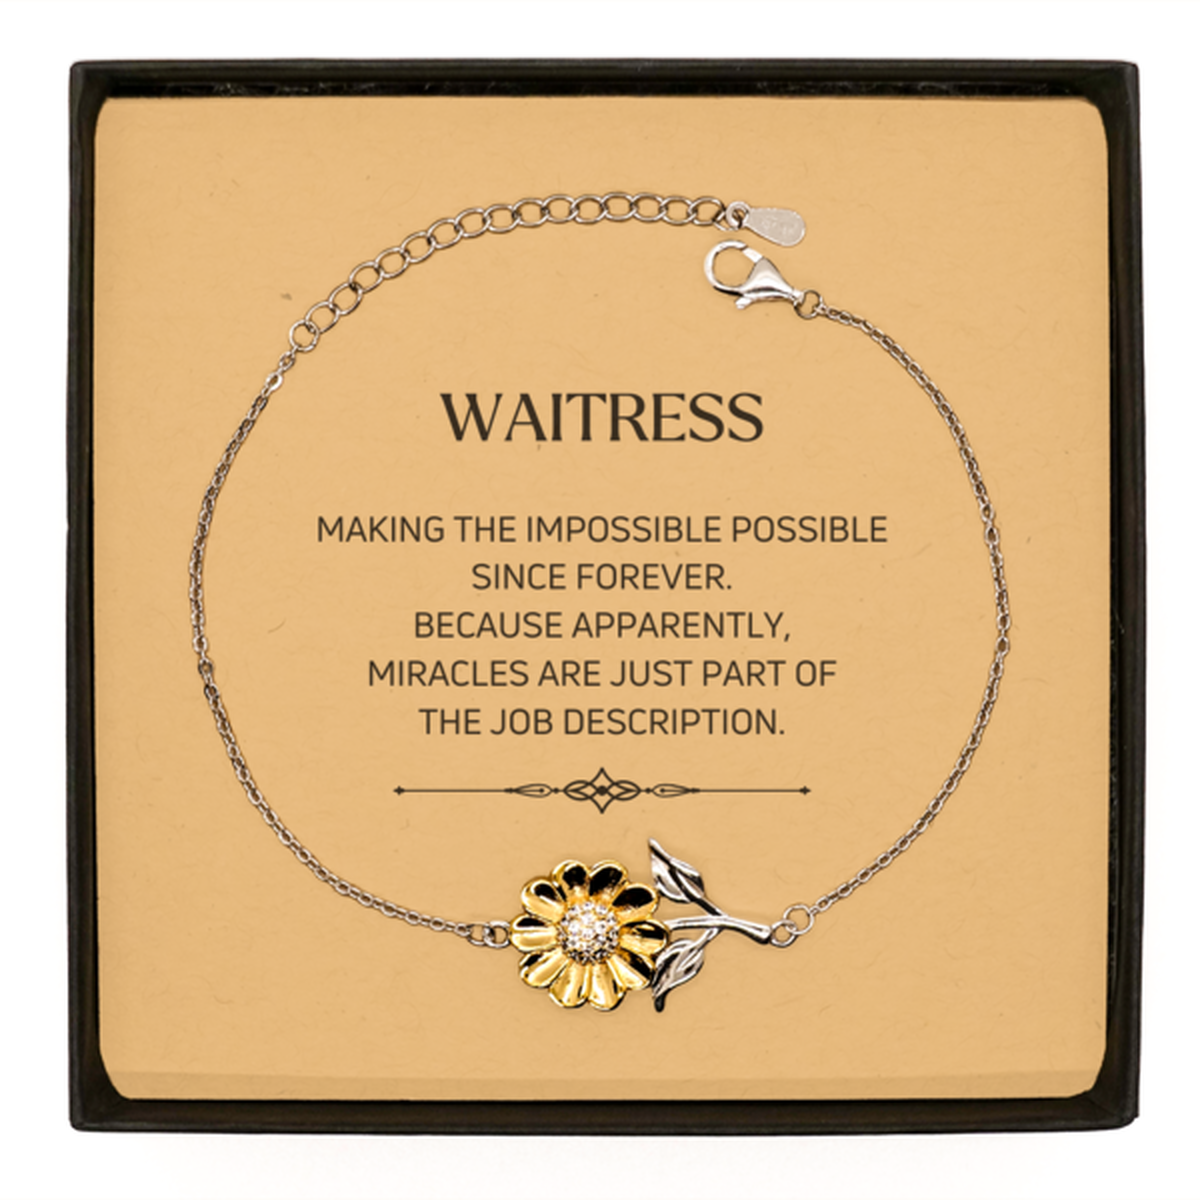 Funny Waitress Gifts, Miracles are just part of the job description, Inspirational Birthday Sunflower Bracelet For Waitress, Men, Women, Coworkers, Friends, Boss